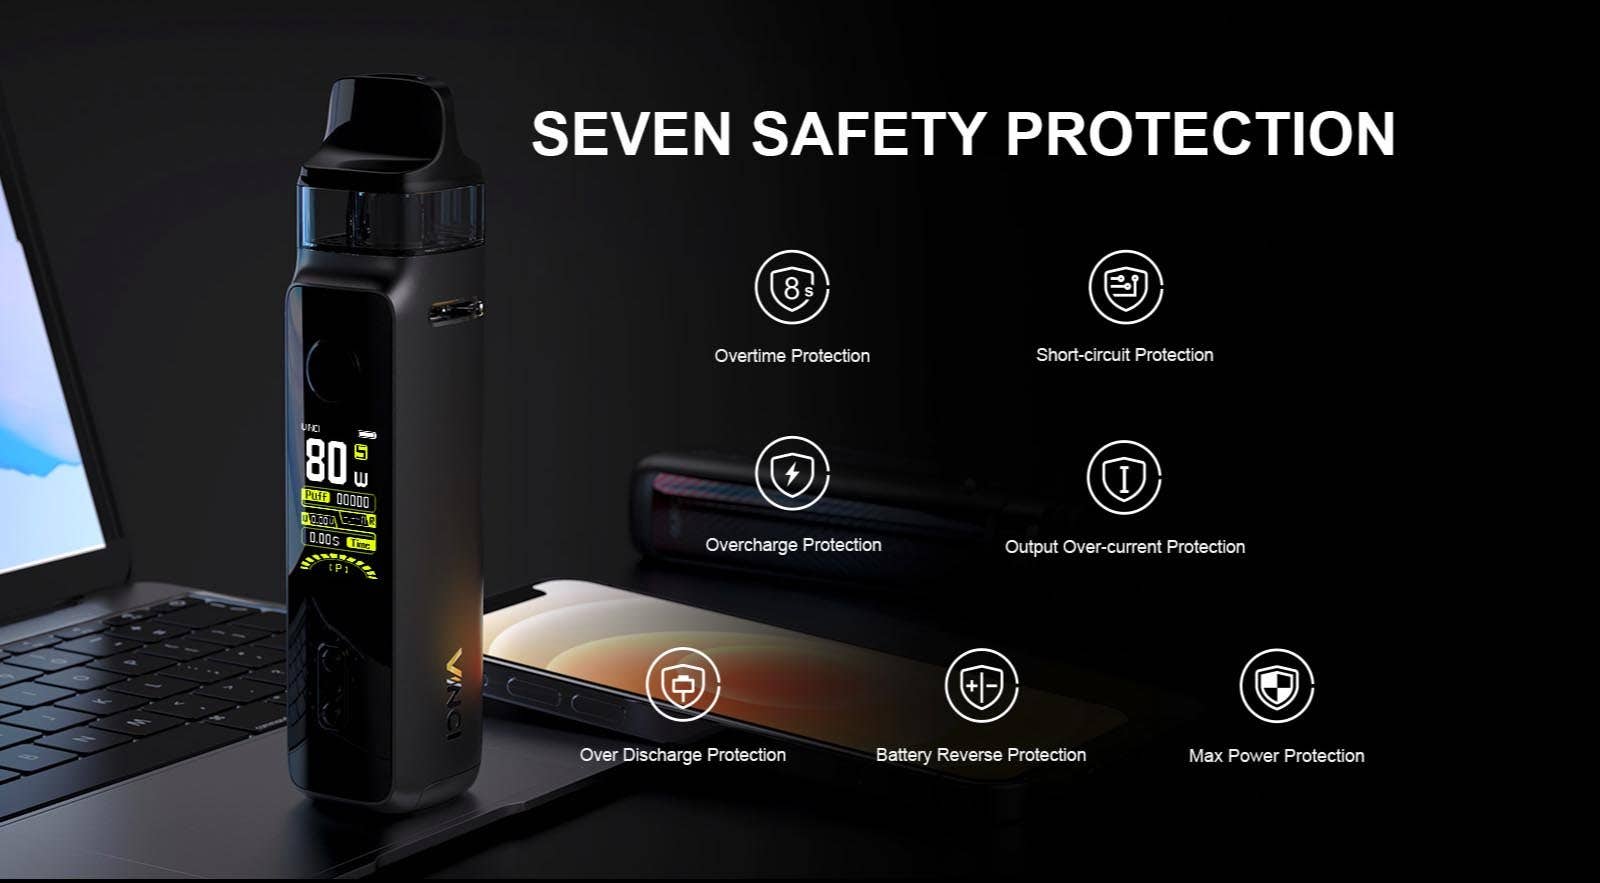 Vinci X2 has you covered with every protection imaginable